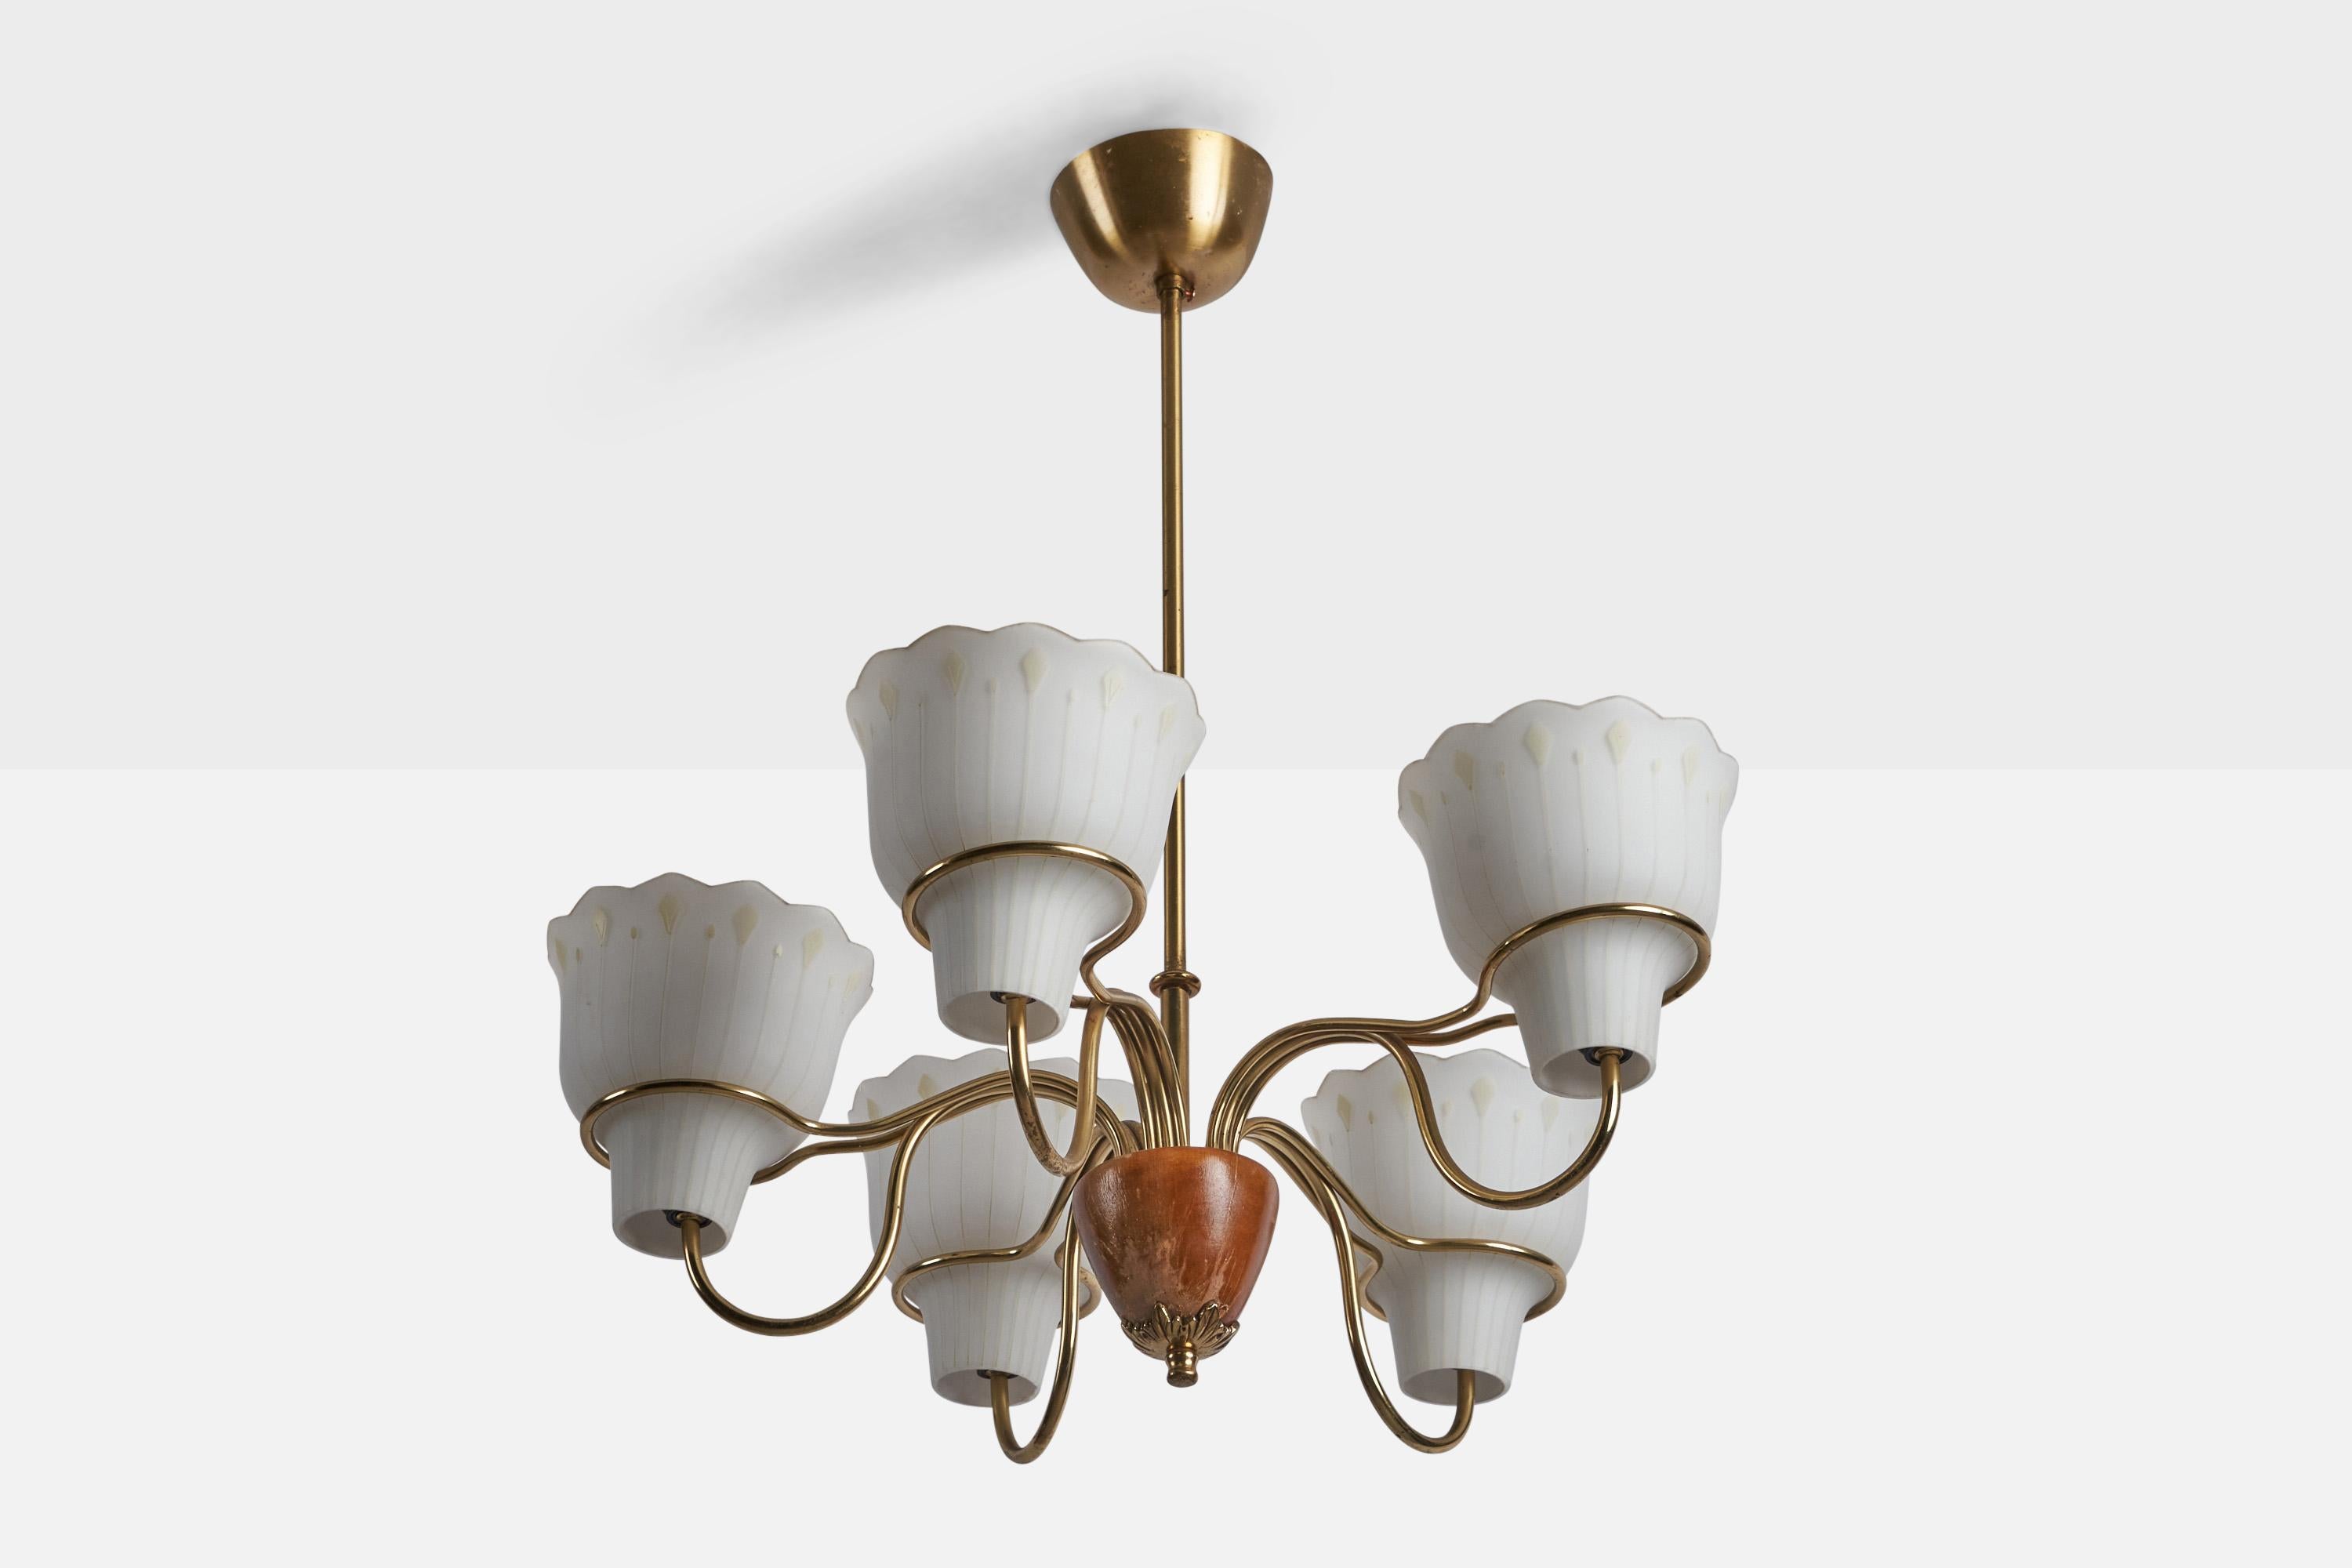 A 5-armed teak, brass and opaline glass chandelier designed and produced in Sweden, 1950s.

Overall Dimensions (inches): 24” H x 20” Diameter
Bulb Specifications: E-26 Bulb
Number of Sockets: 5